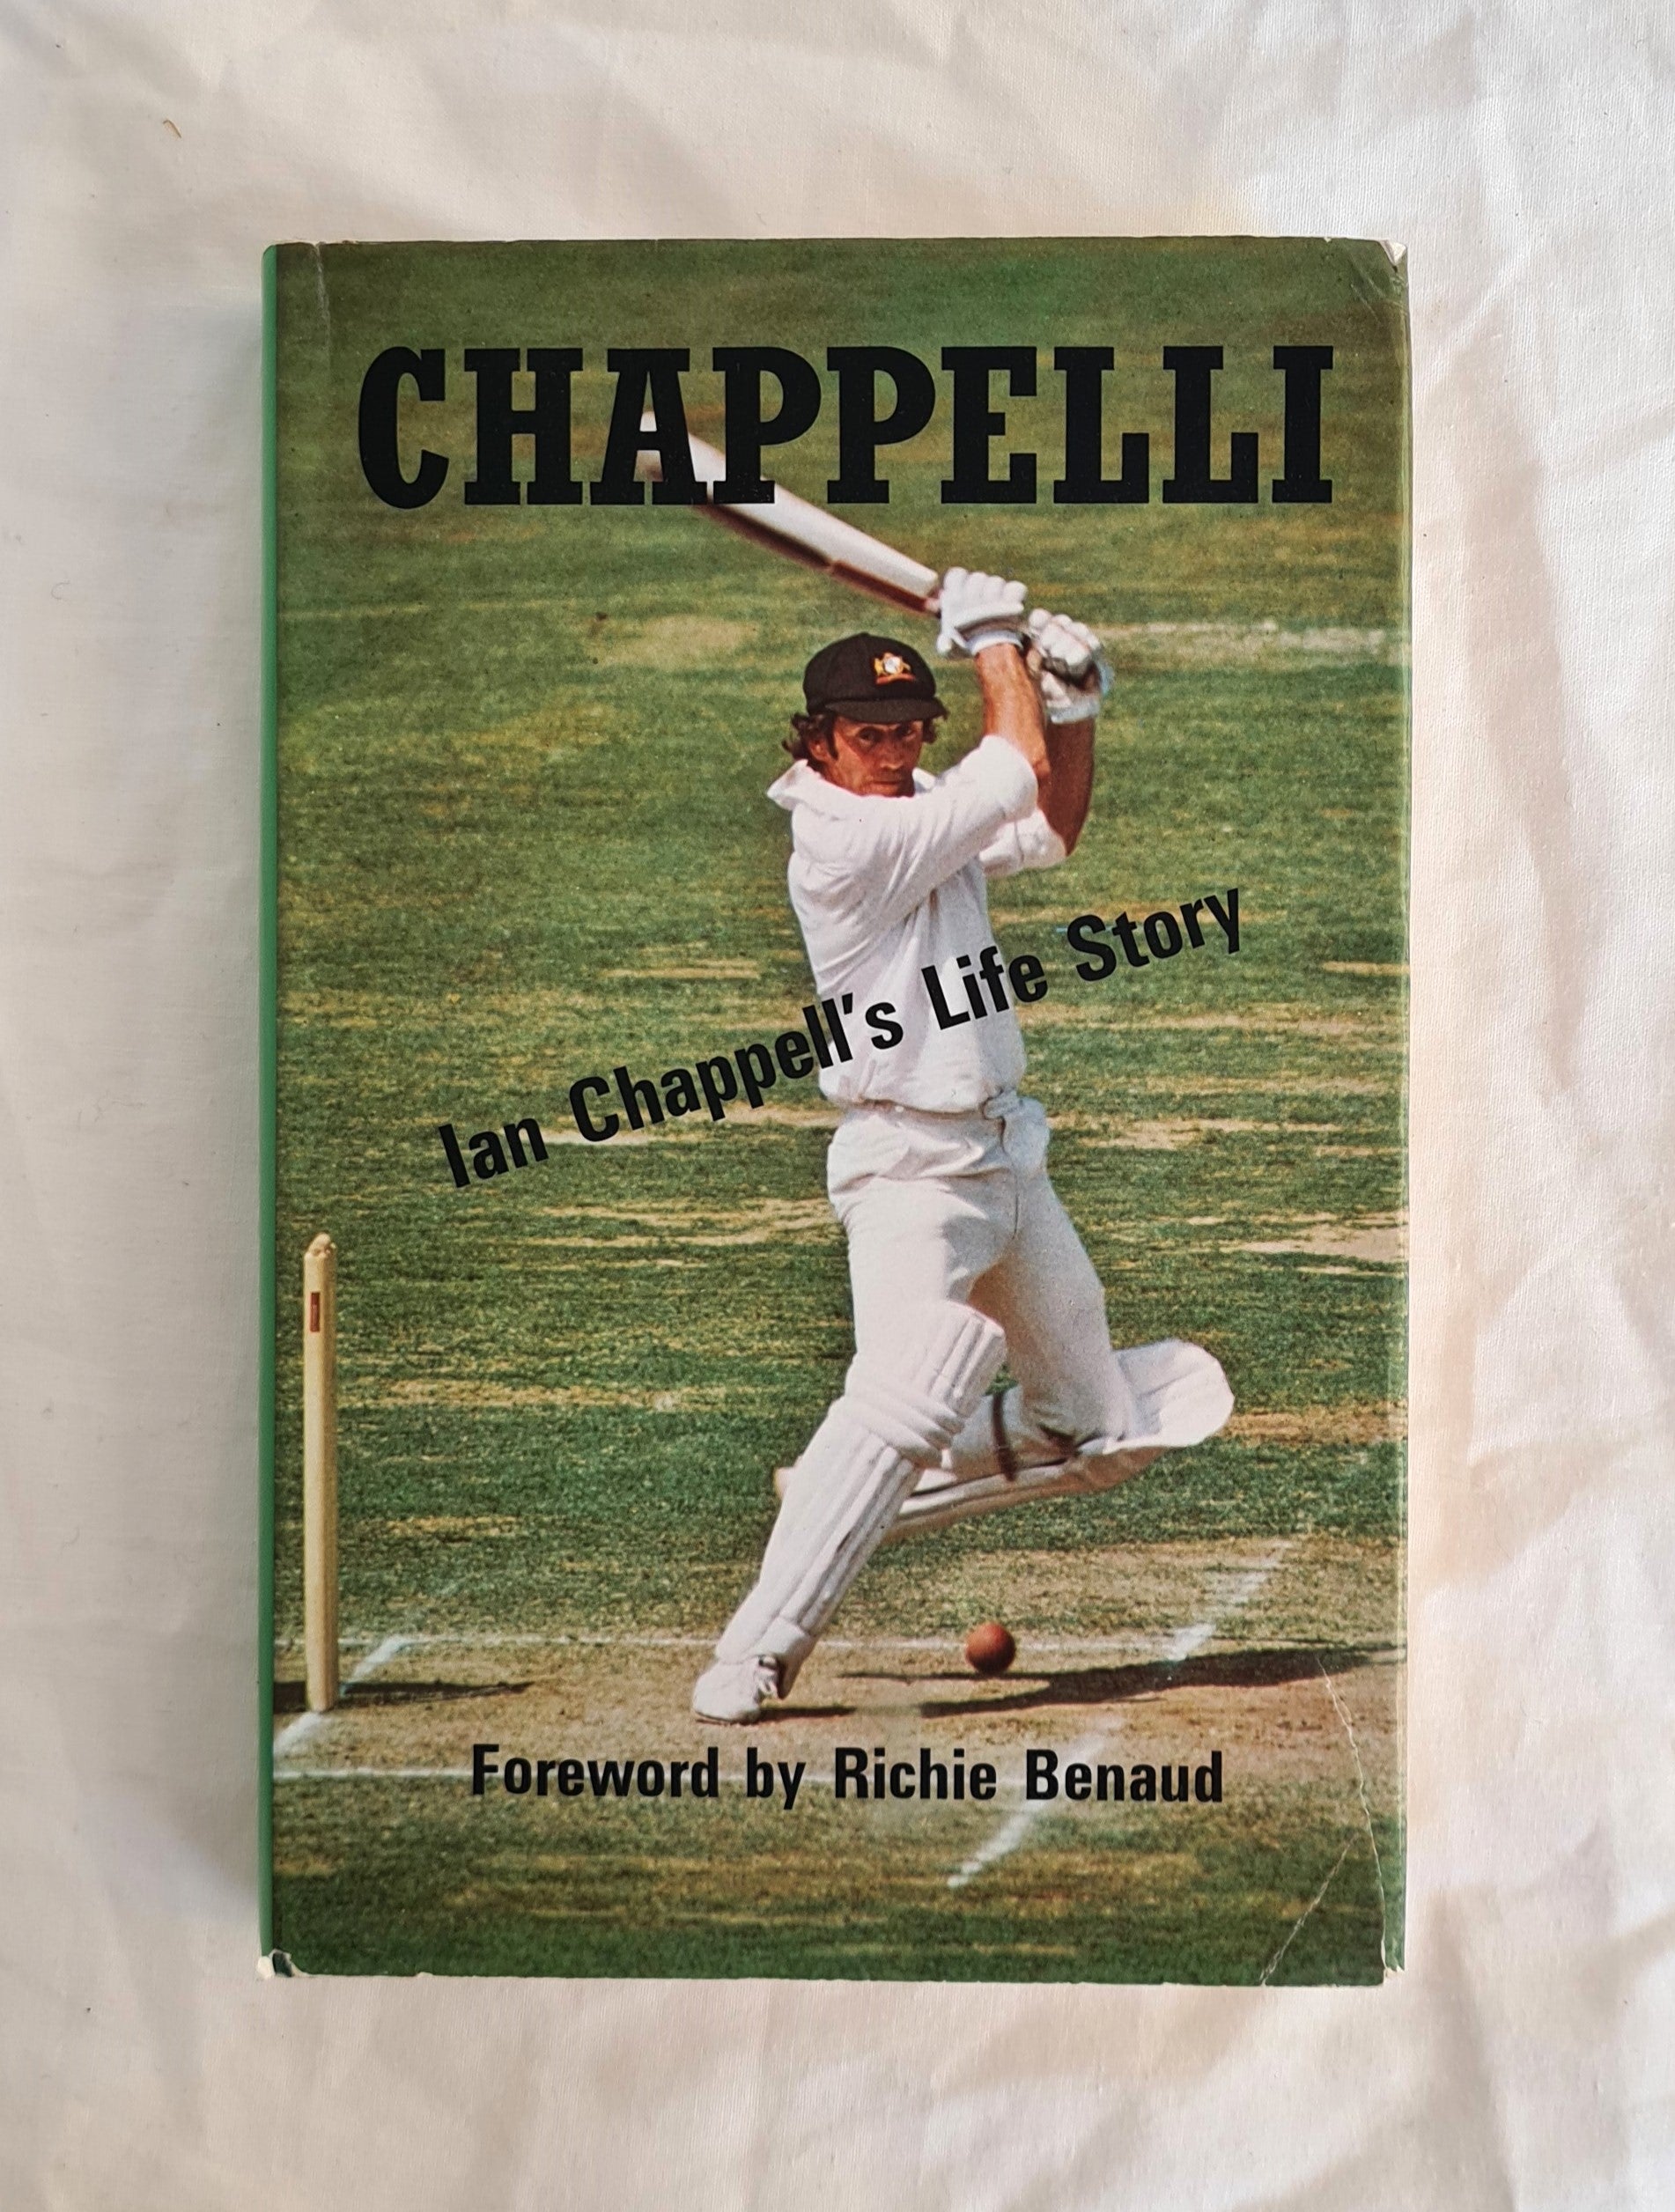 Chappelli  Ian Chappell’s Life Story  by Ian Chappell